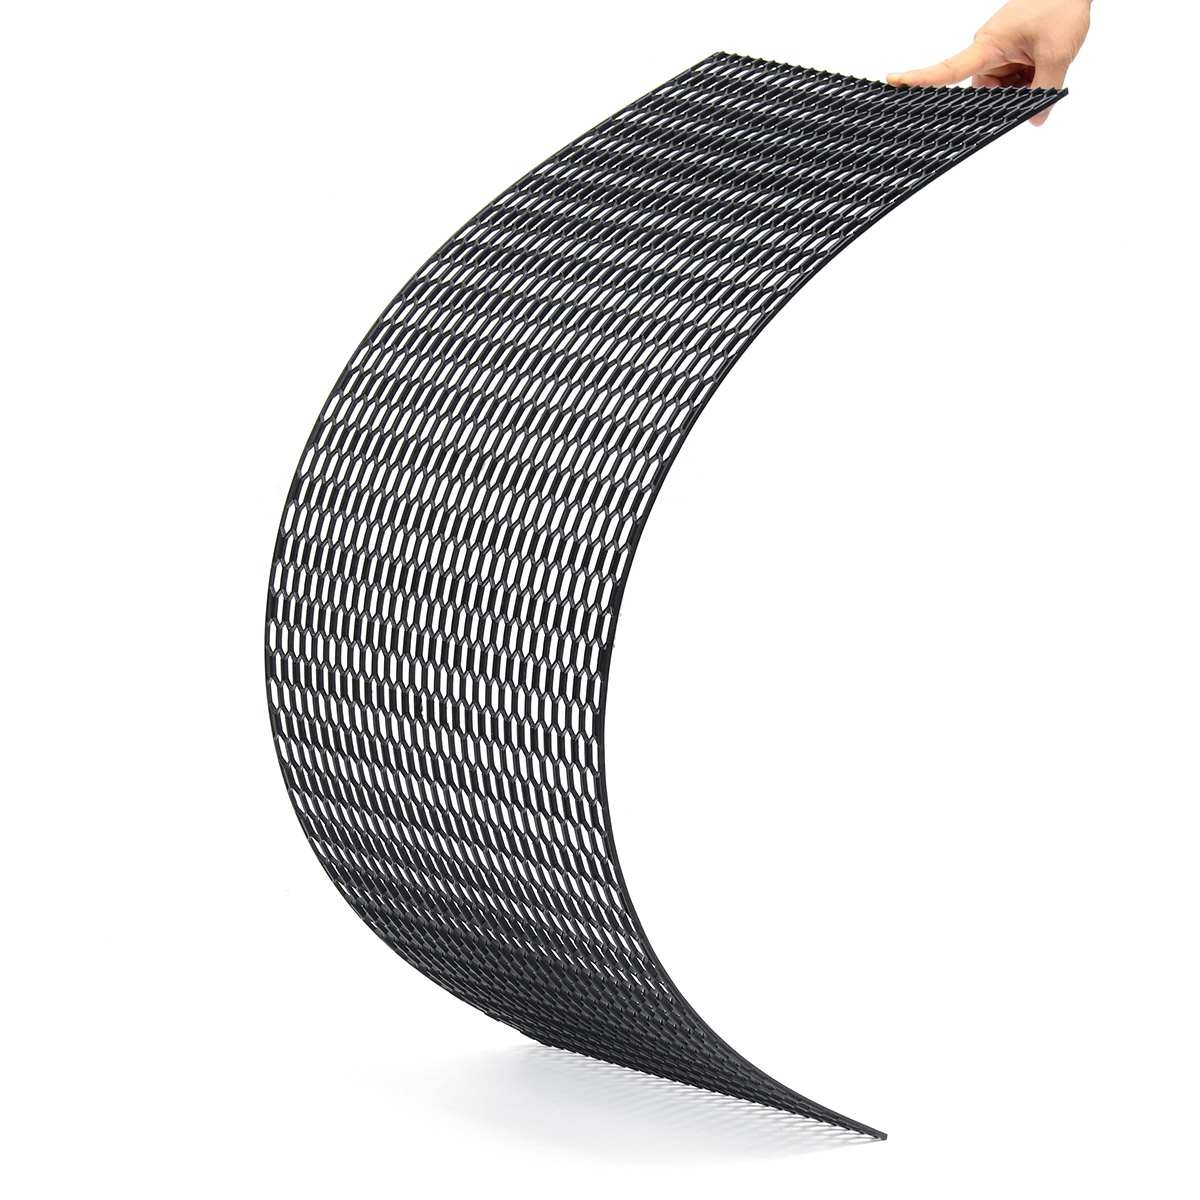 120X40cm Universal Car Styling Air Intake Racing Honeycomb Meshed Grille Spoiler Bumper Hood Vent Racing Grills